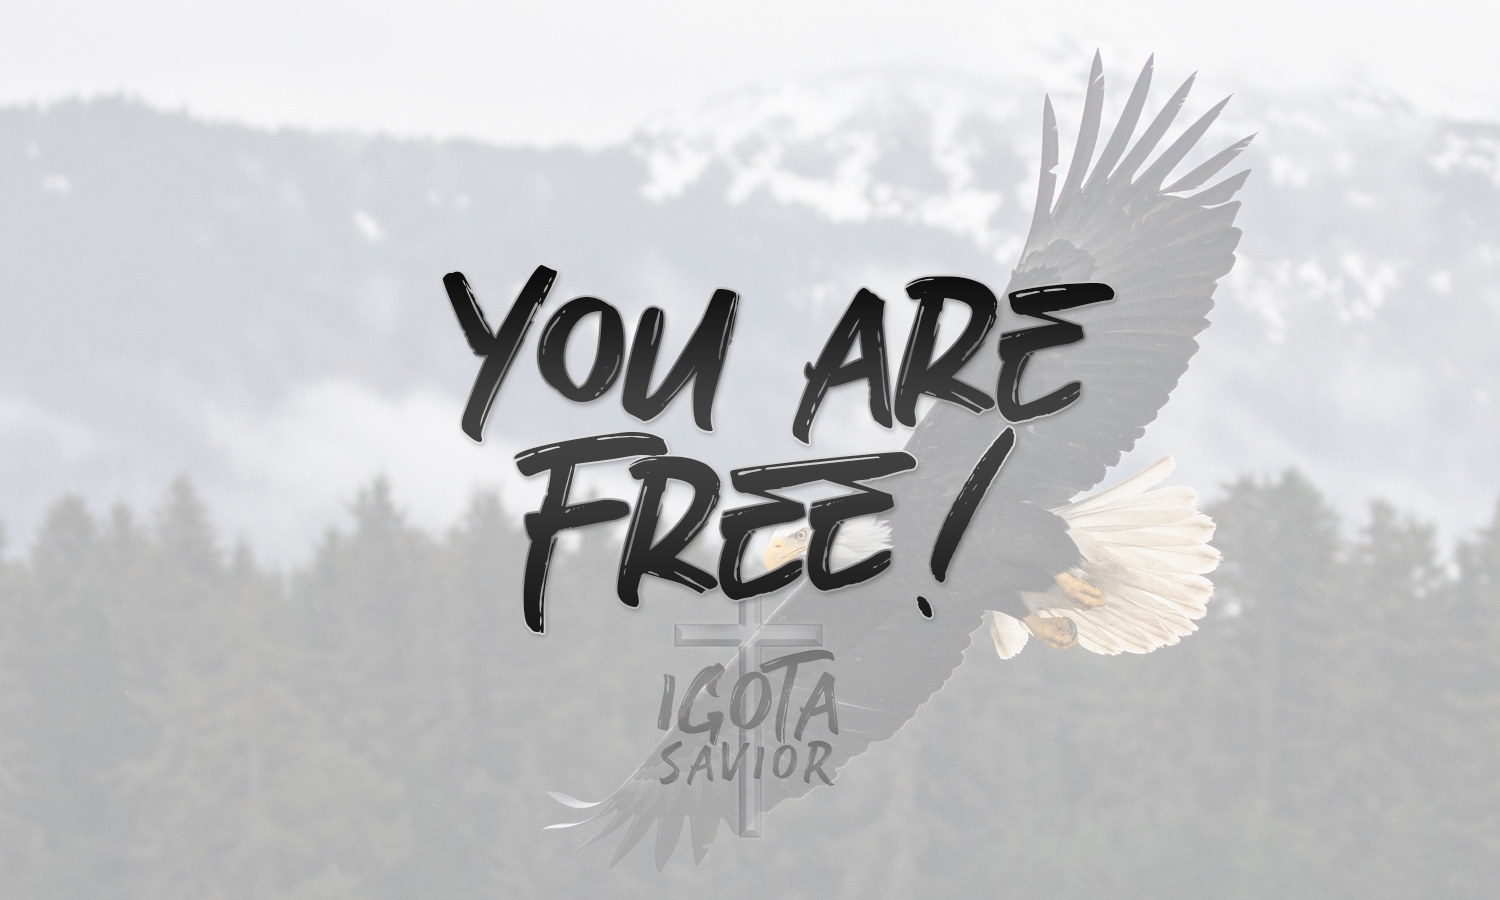 You Are Free!